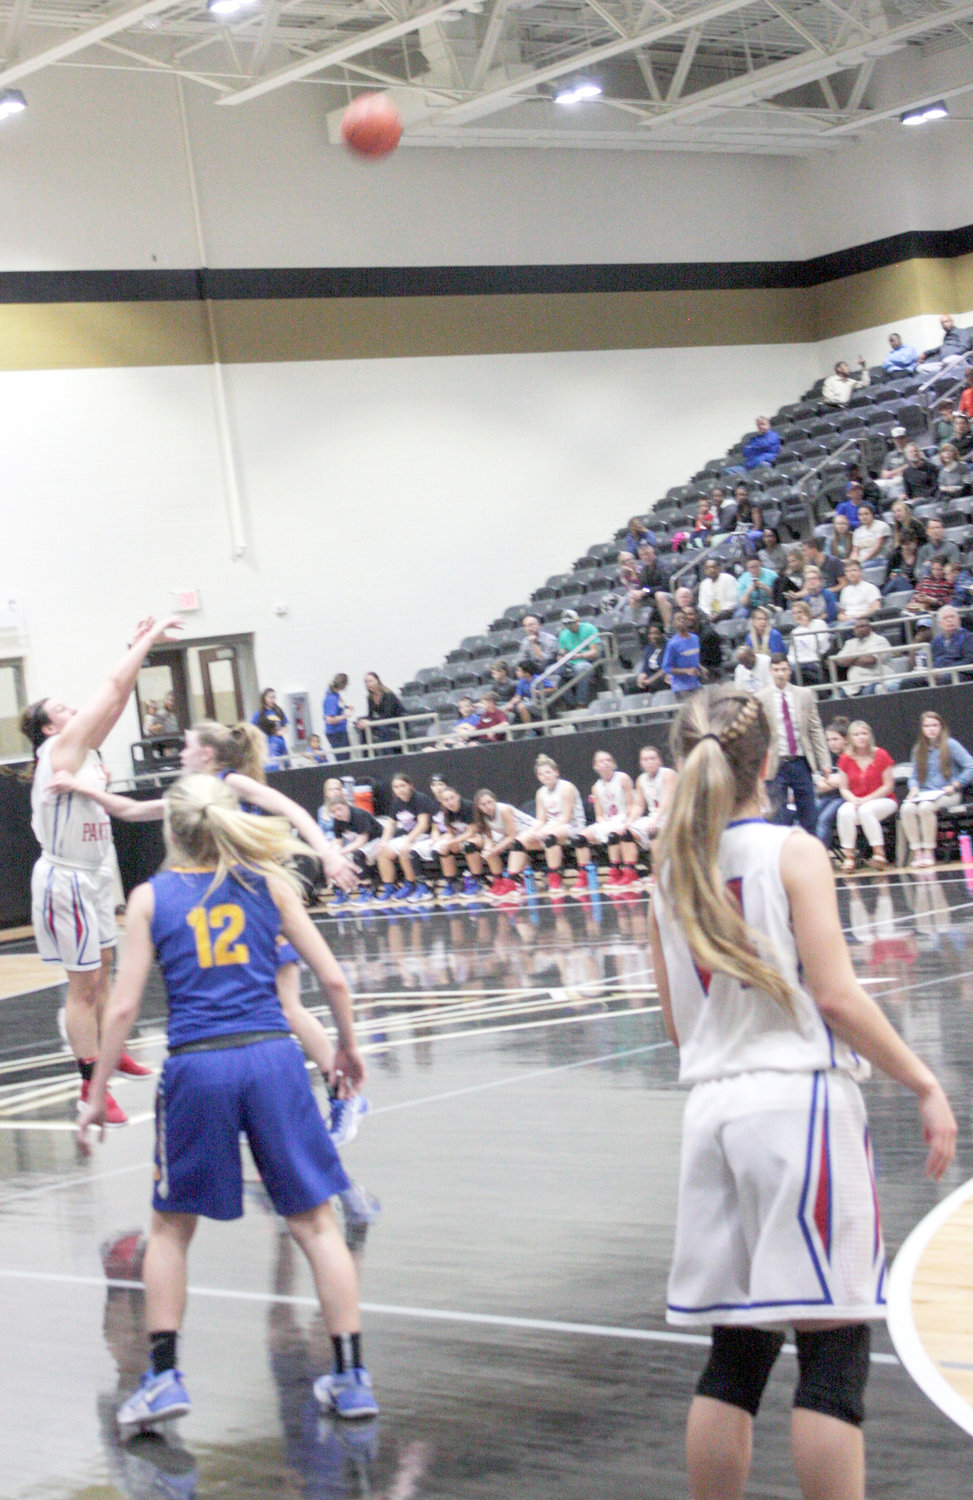 It was bombs away when Shelby Wright launched this really long three-point shot against the Sunnyvale Lady Raiders last Tuesday night in the Class 3A Regional quarterfinals in Kaufman. The game was an air-tight battle from start to finish with Alba-Golden holding on for a 57-55 win.